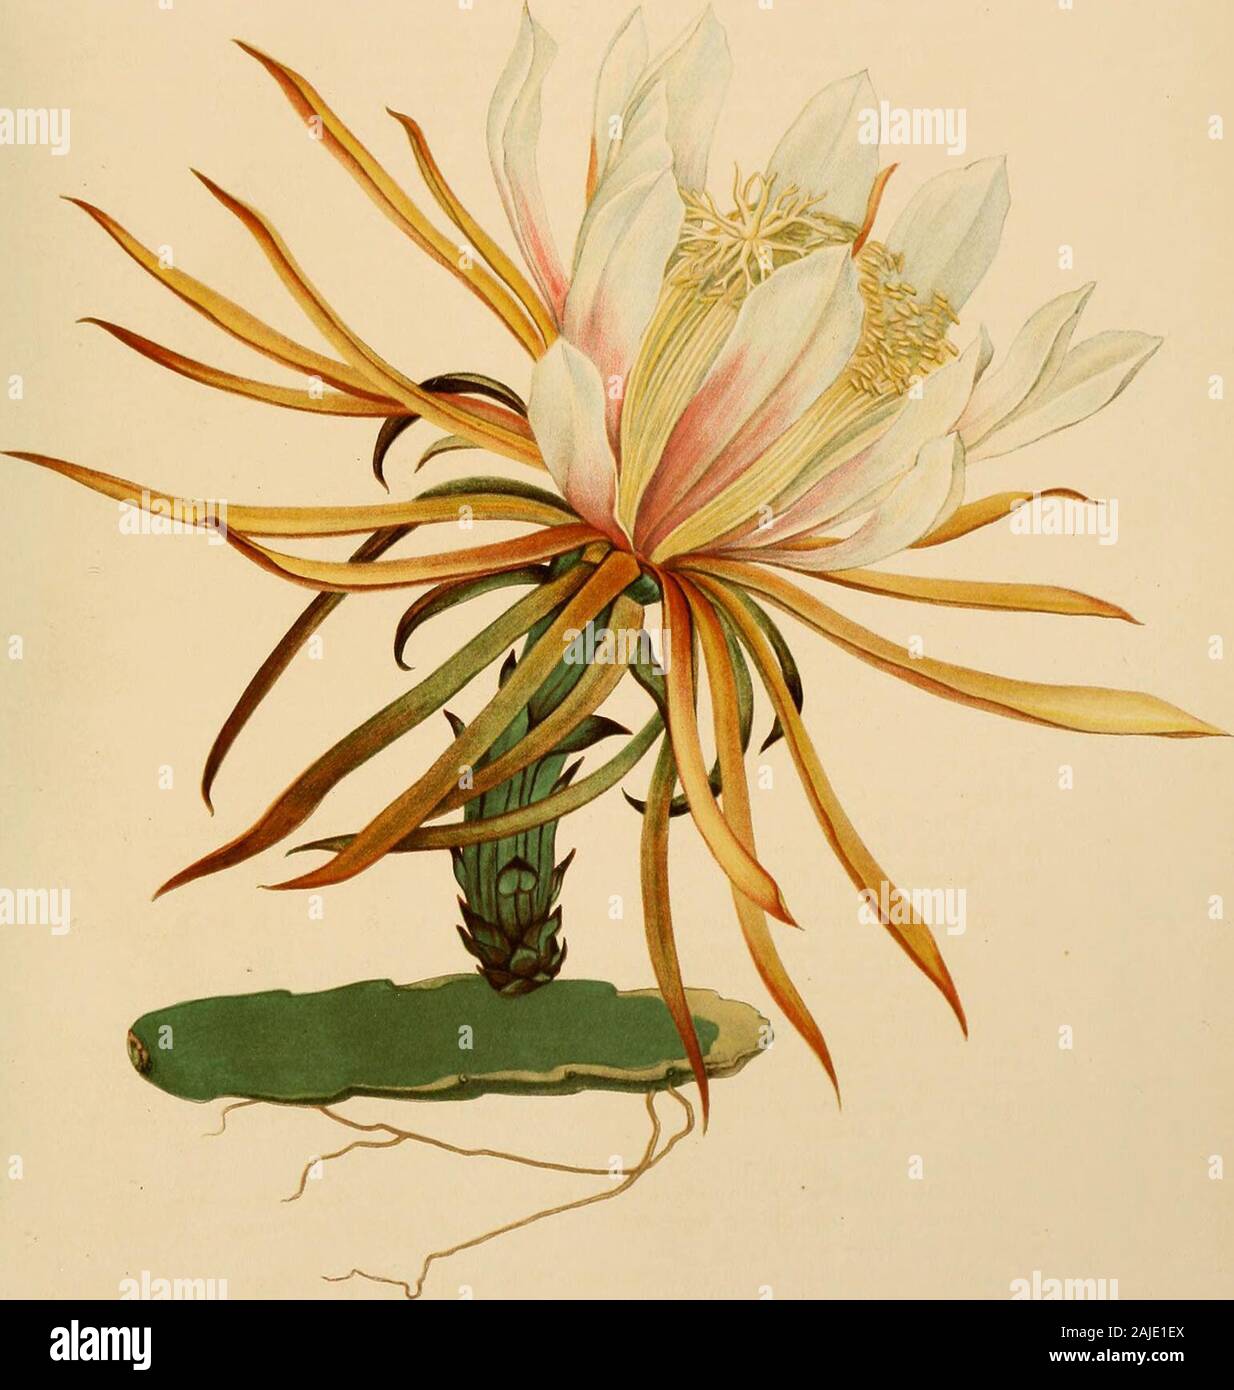 The Cactaceae : descriptions and illustrations of plants of the cactus family . Fig. 268.—Hylocereus trigonus. BRITTON AND ROSE. VOL. II.. M E. Eaton del Flower on short branch of Hylocereus lemairei.. X 0.7. HYLOCKKKlS. 193 Salm-Dyck (Cact. Horl. Dyck. 1849. 220. 1850) described C. tfiangularis uhdeanus,based upon a cultivated Mexican plant. It is described with 4 to 6 radial spines and 1central, yellow, minute. Salm-Dyck was uncertain whether it was a garden variety or adistinct species. Coats anizogonus Salm-Dyek (Cact. Hort. Dyck. 1849. 52. 1850) was given as asynonym of Corns triangularis Stock Photo